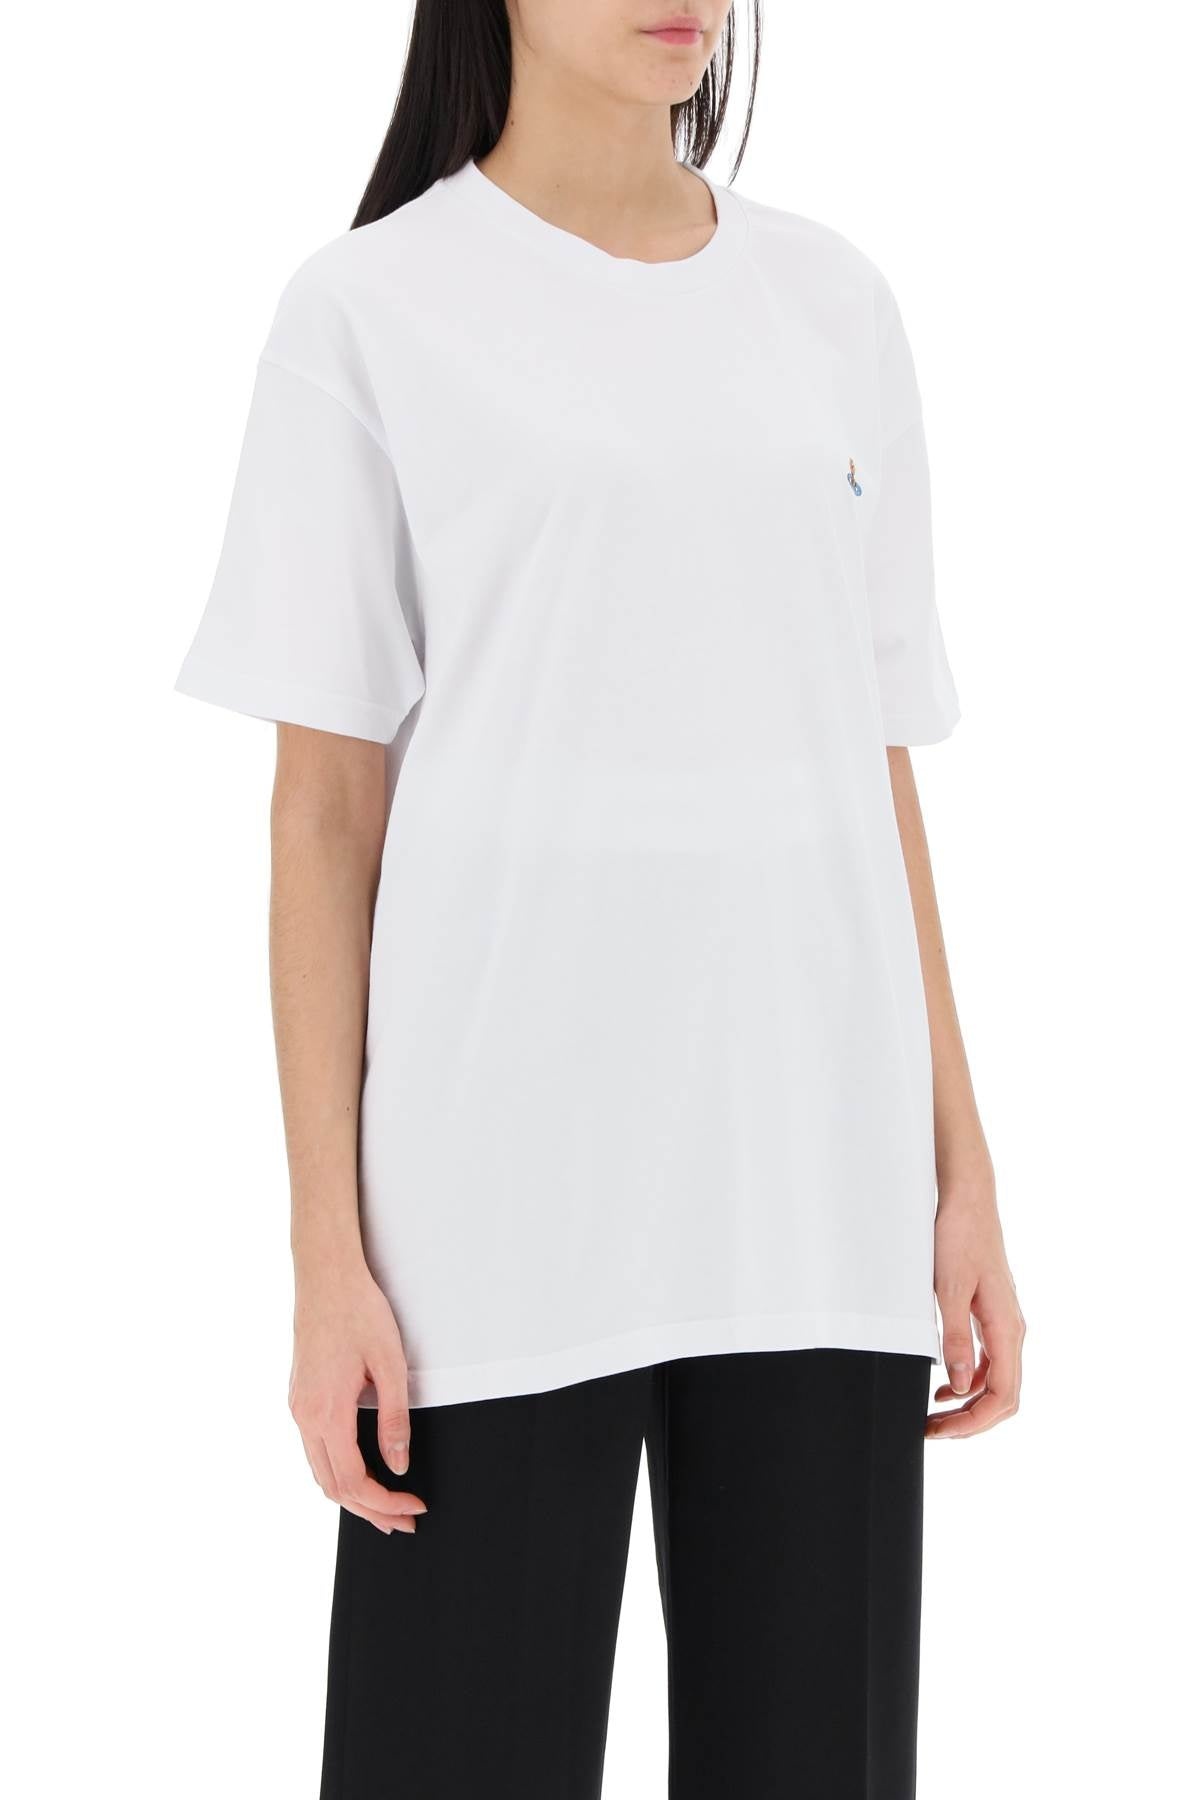 Vivienne Westwood Classic T-Shirt With Orb Logo Women - 2